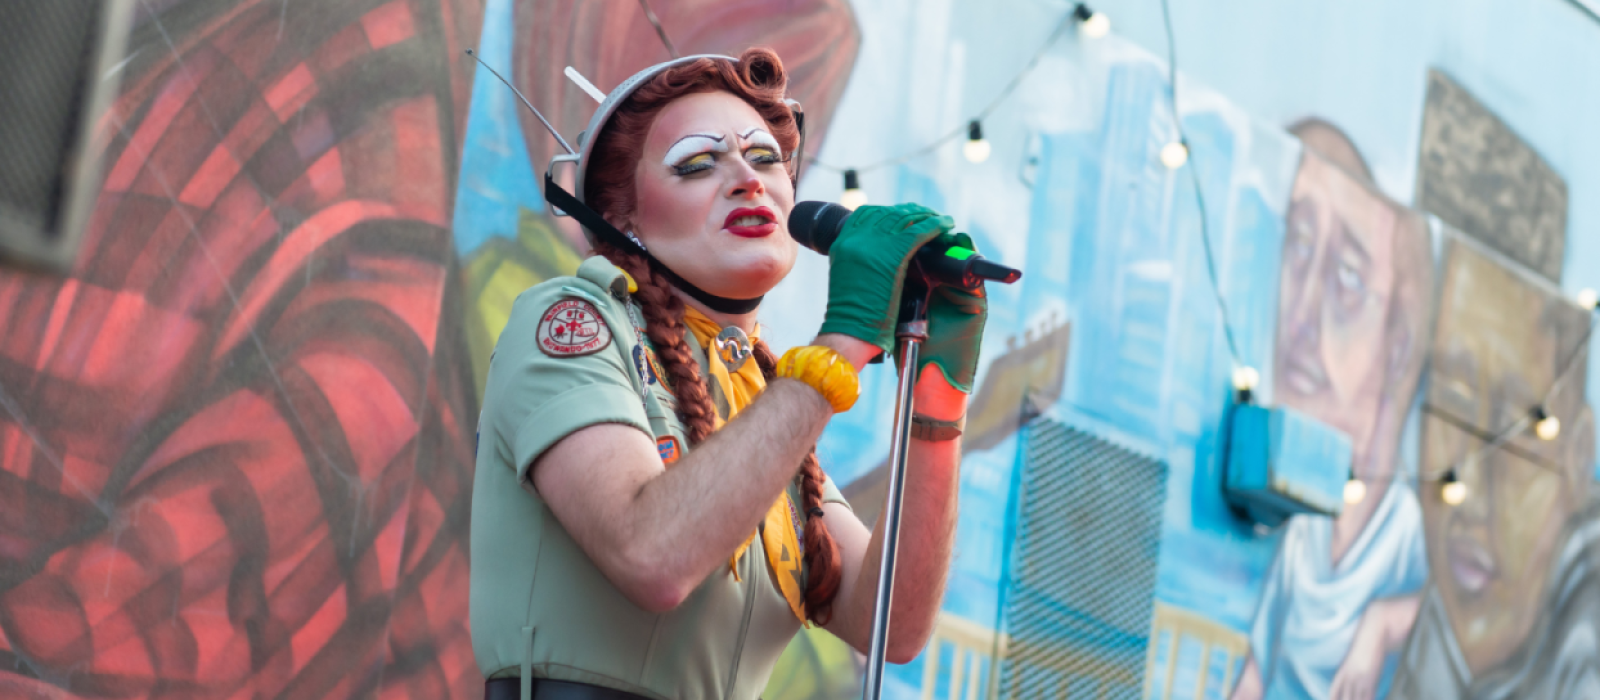 Pearle Harbour, a drag performer, has a metal colander on her head and sings to the audience from an outdoor stage